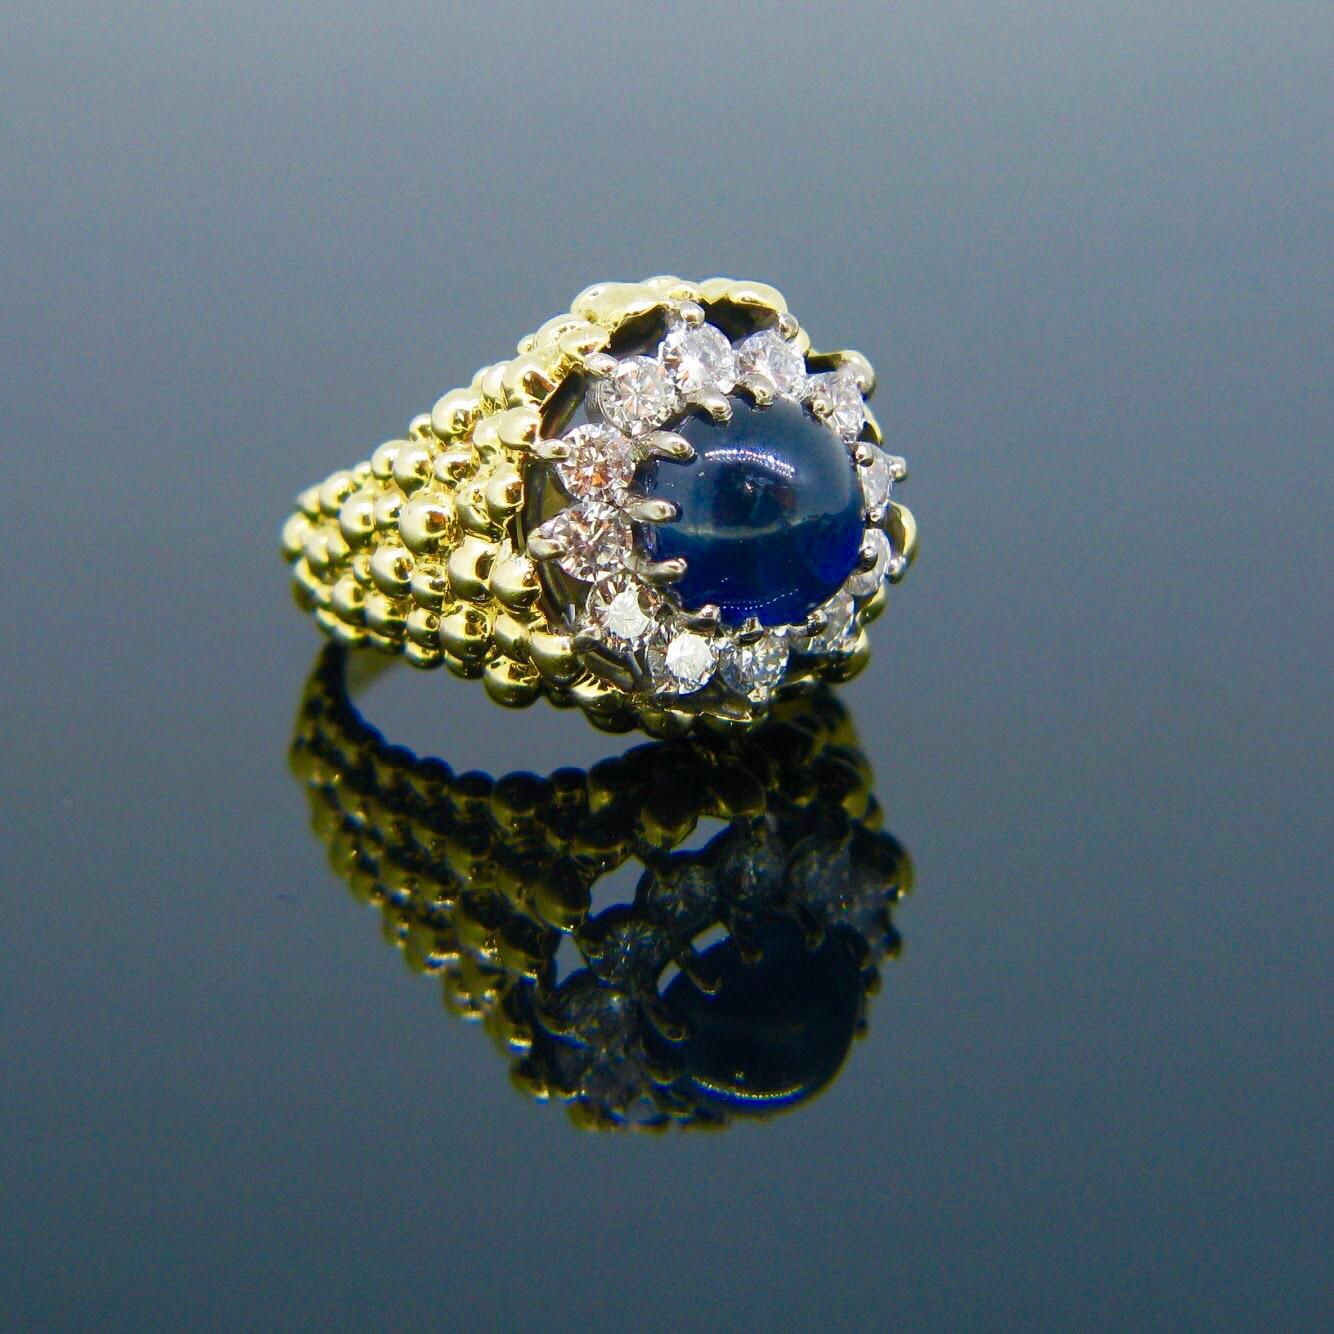 This impressive ring is signed Kutchinsky. It features a cabochon cut sapphire surrounded by 12 round brilliant cut diamonds. The ring is made in 18kt textured yellow gold giving the ring an unusual design.  It is signed inside the band